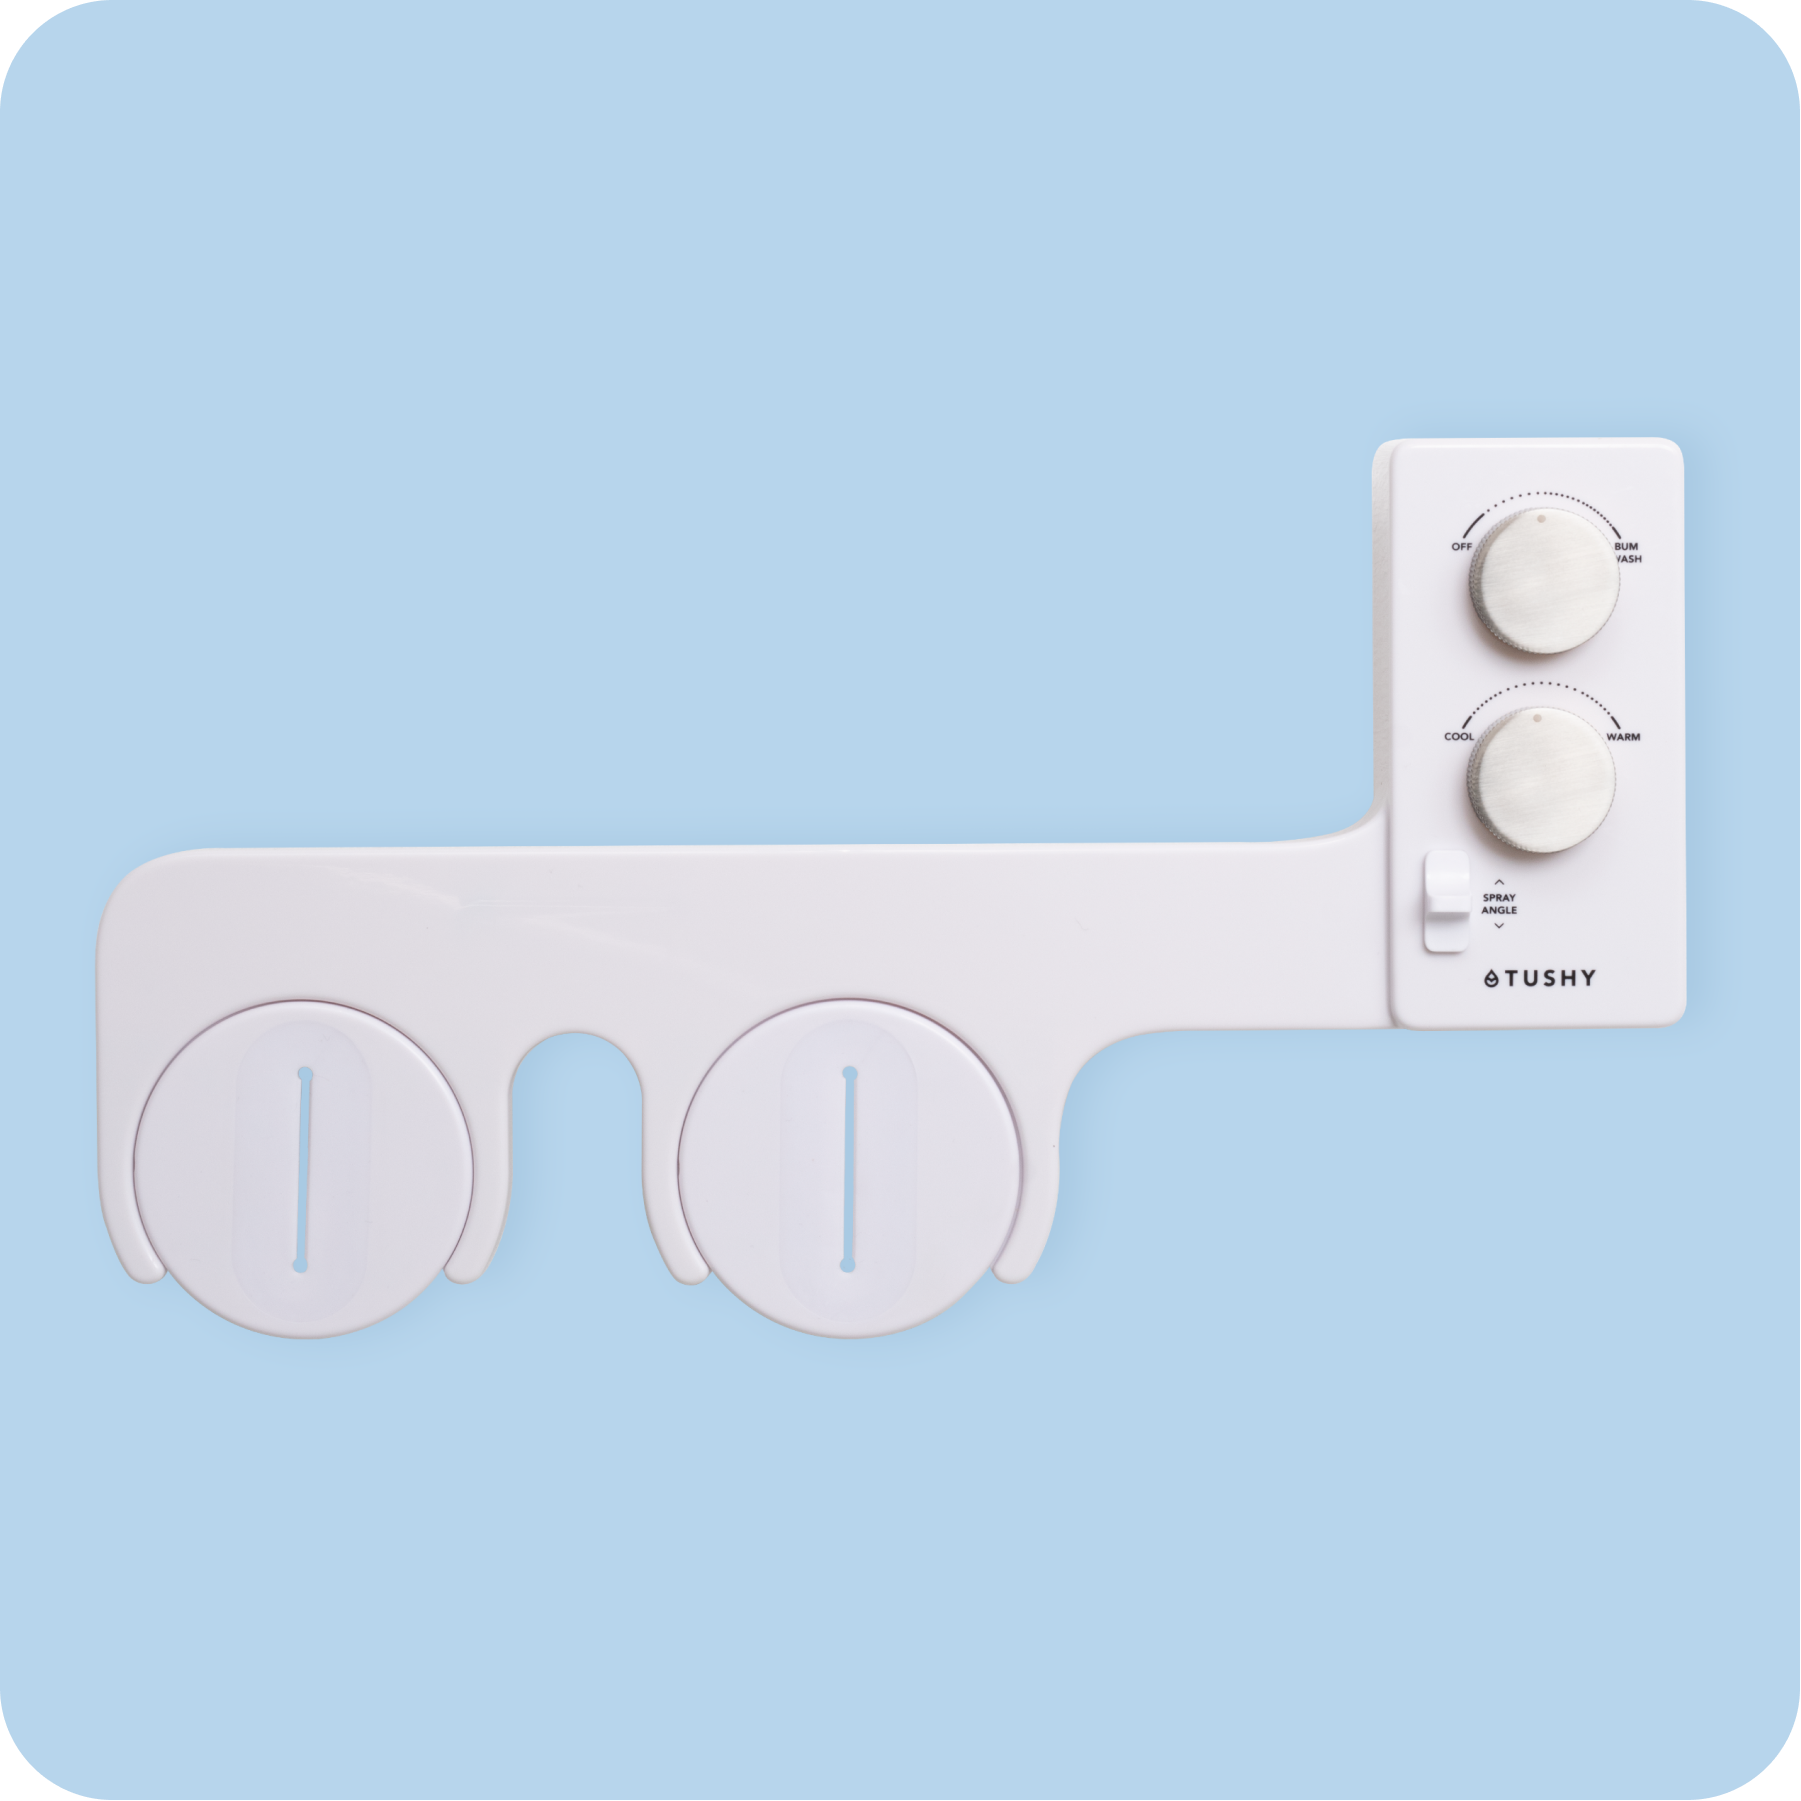 Tushy Spa 3.0 White / Platinum - a warm water bidet attachment by TUSHY White with Platinum Knobs